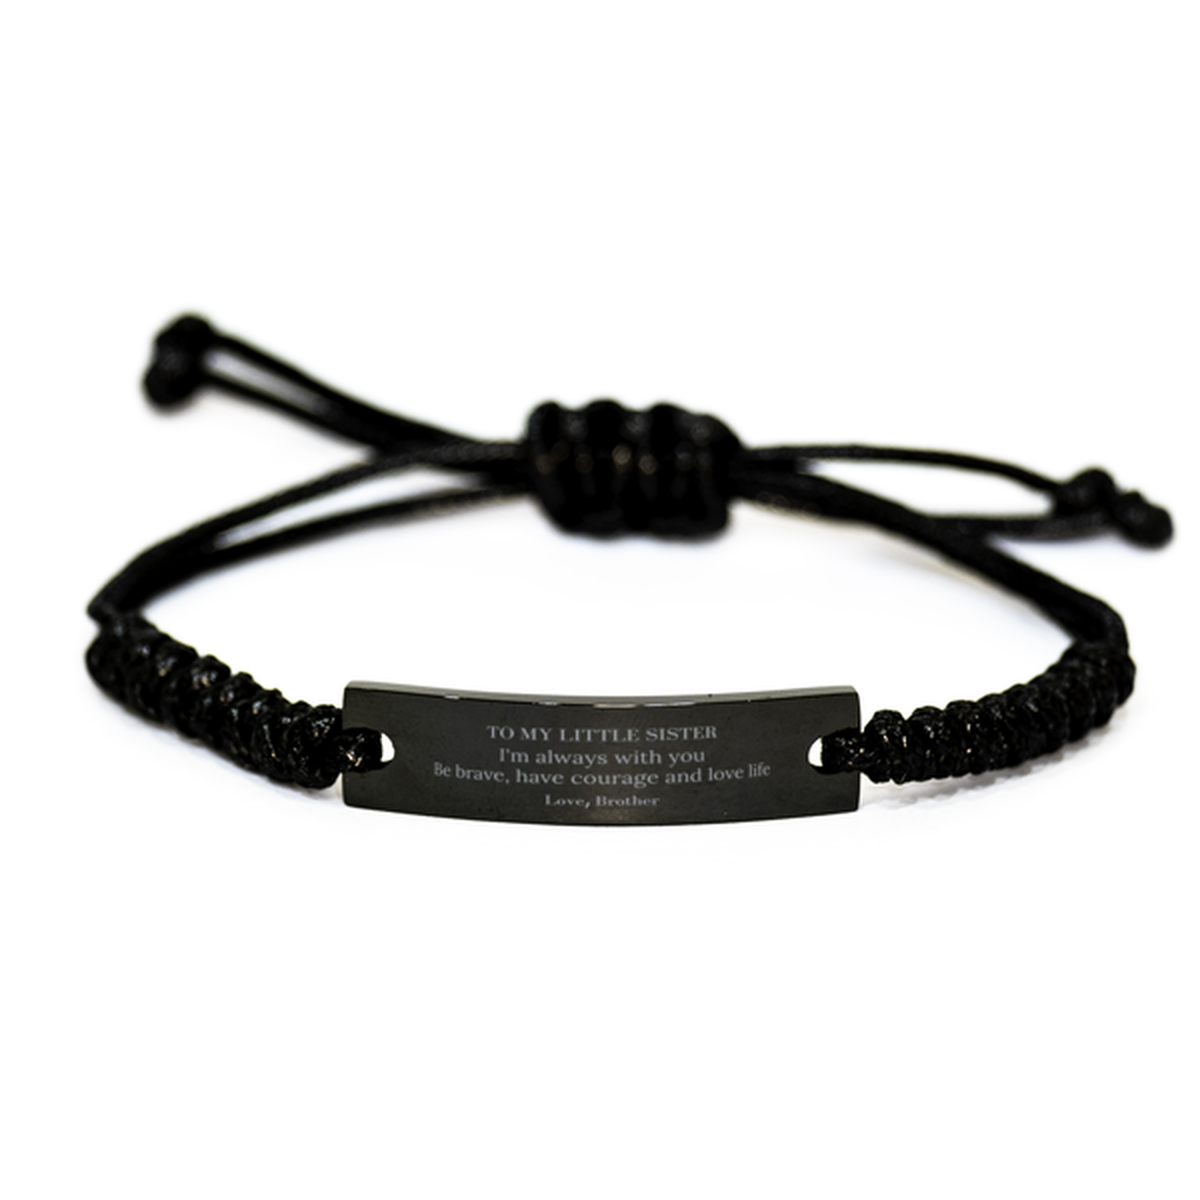 To My Little Sister Gifts from Brother, Unique Black Rope Bracelet Inspirational Christmas Birthday Graduation Gifts for Little Sister I'm always with you. Be brave, have courage and love life. Love, Brother